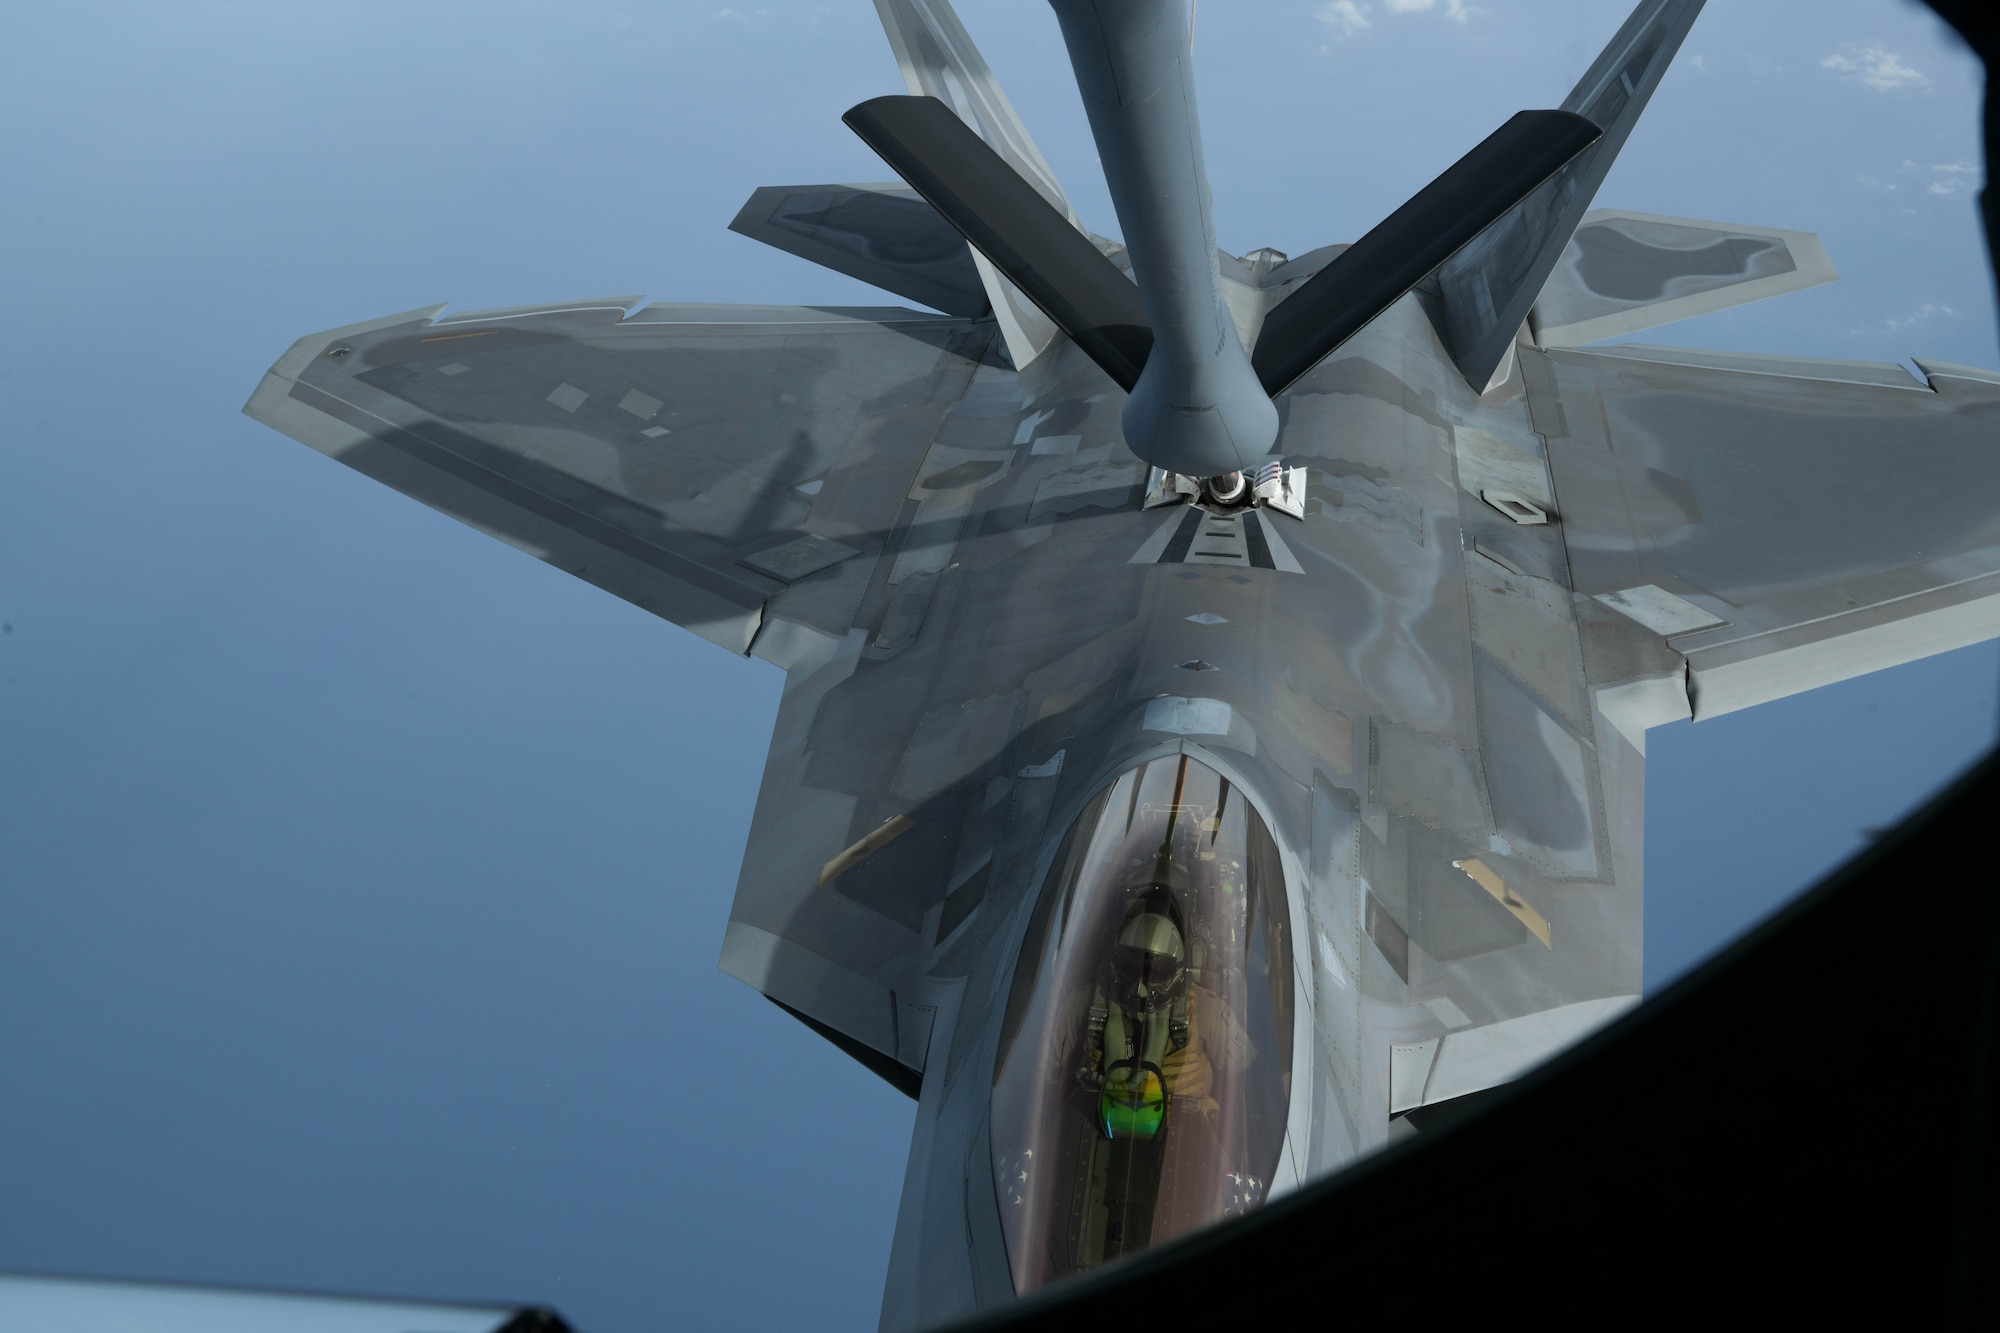 A U.S. Air Force F-22 Raptor, from the 199th Fighter Squadron, approaches a KC-135 Stratotanker, from the 909th Air Refueling Squadron, for refueling during a 5th generation fighter operation near Japan, April 1, 2021. The F-22 Raptors are currently operating out of Marine Corps Air Station Iwakuni, Japan, to support U.S. Indo-Pacific Command’s dynamic force employment concept. (U.S. Air Force photo by Senior Airman Rebeckah Medeiros)